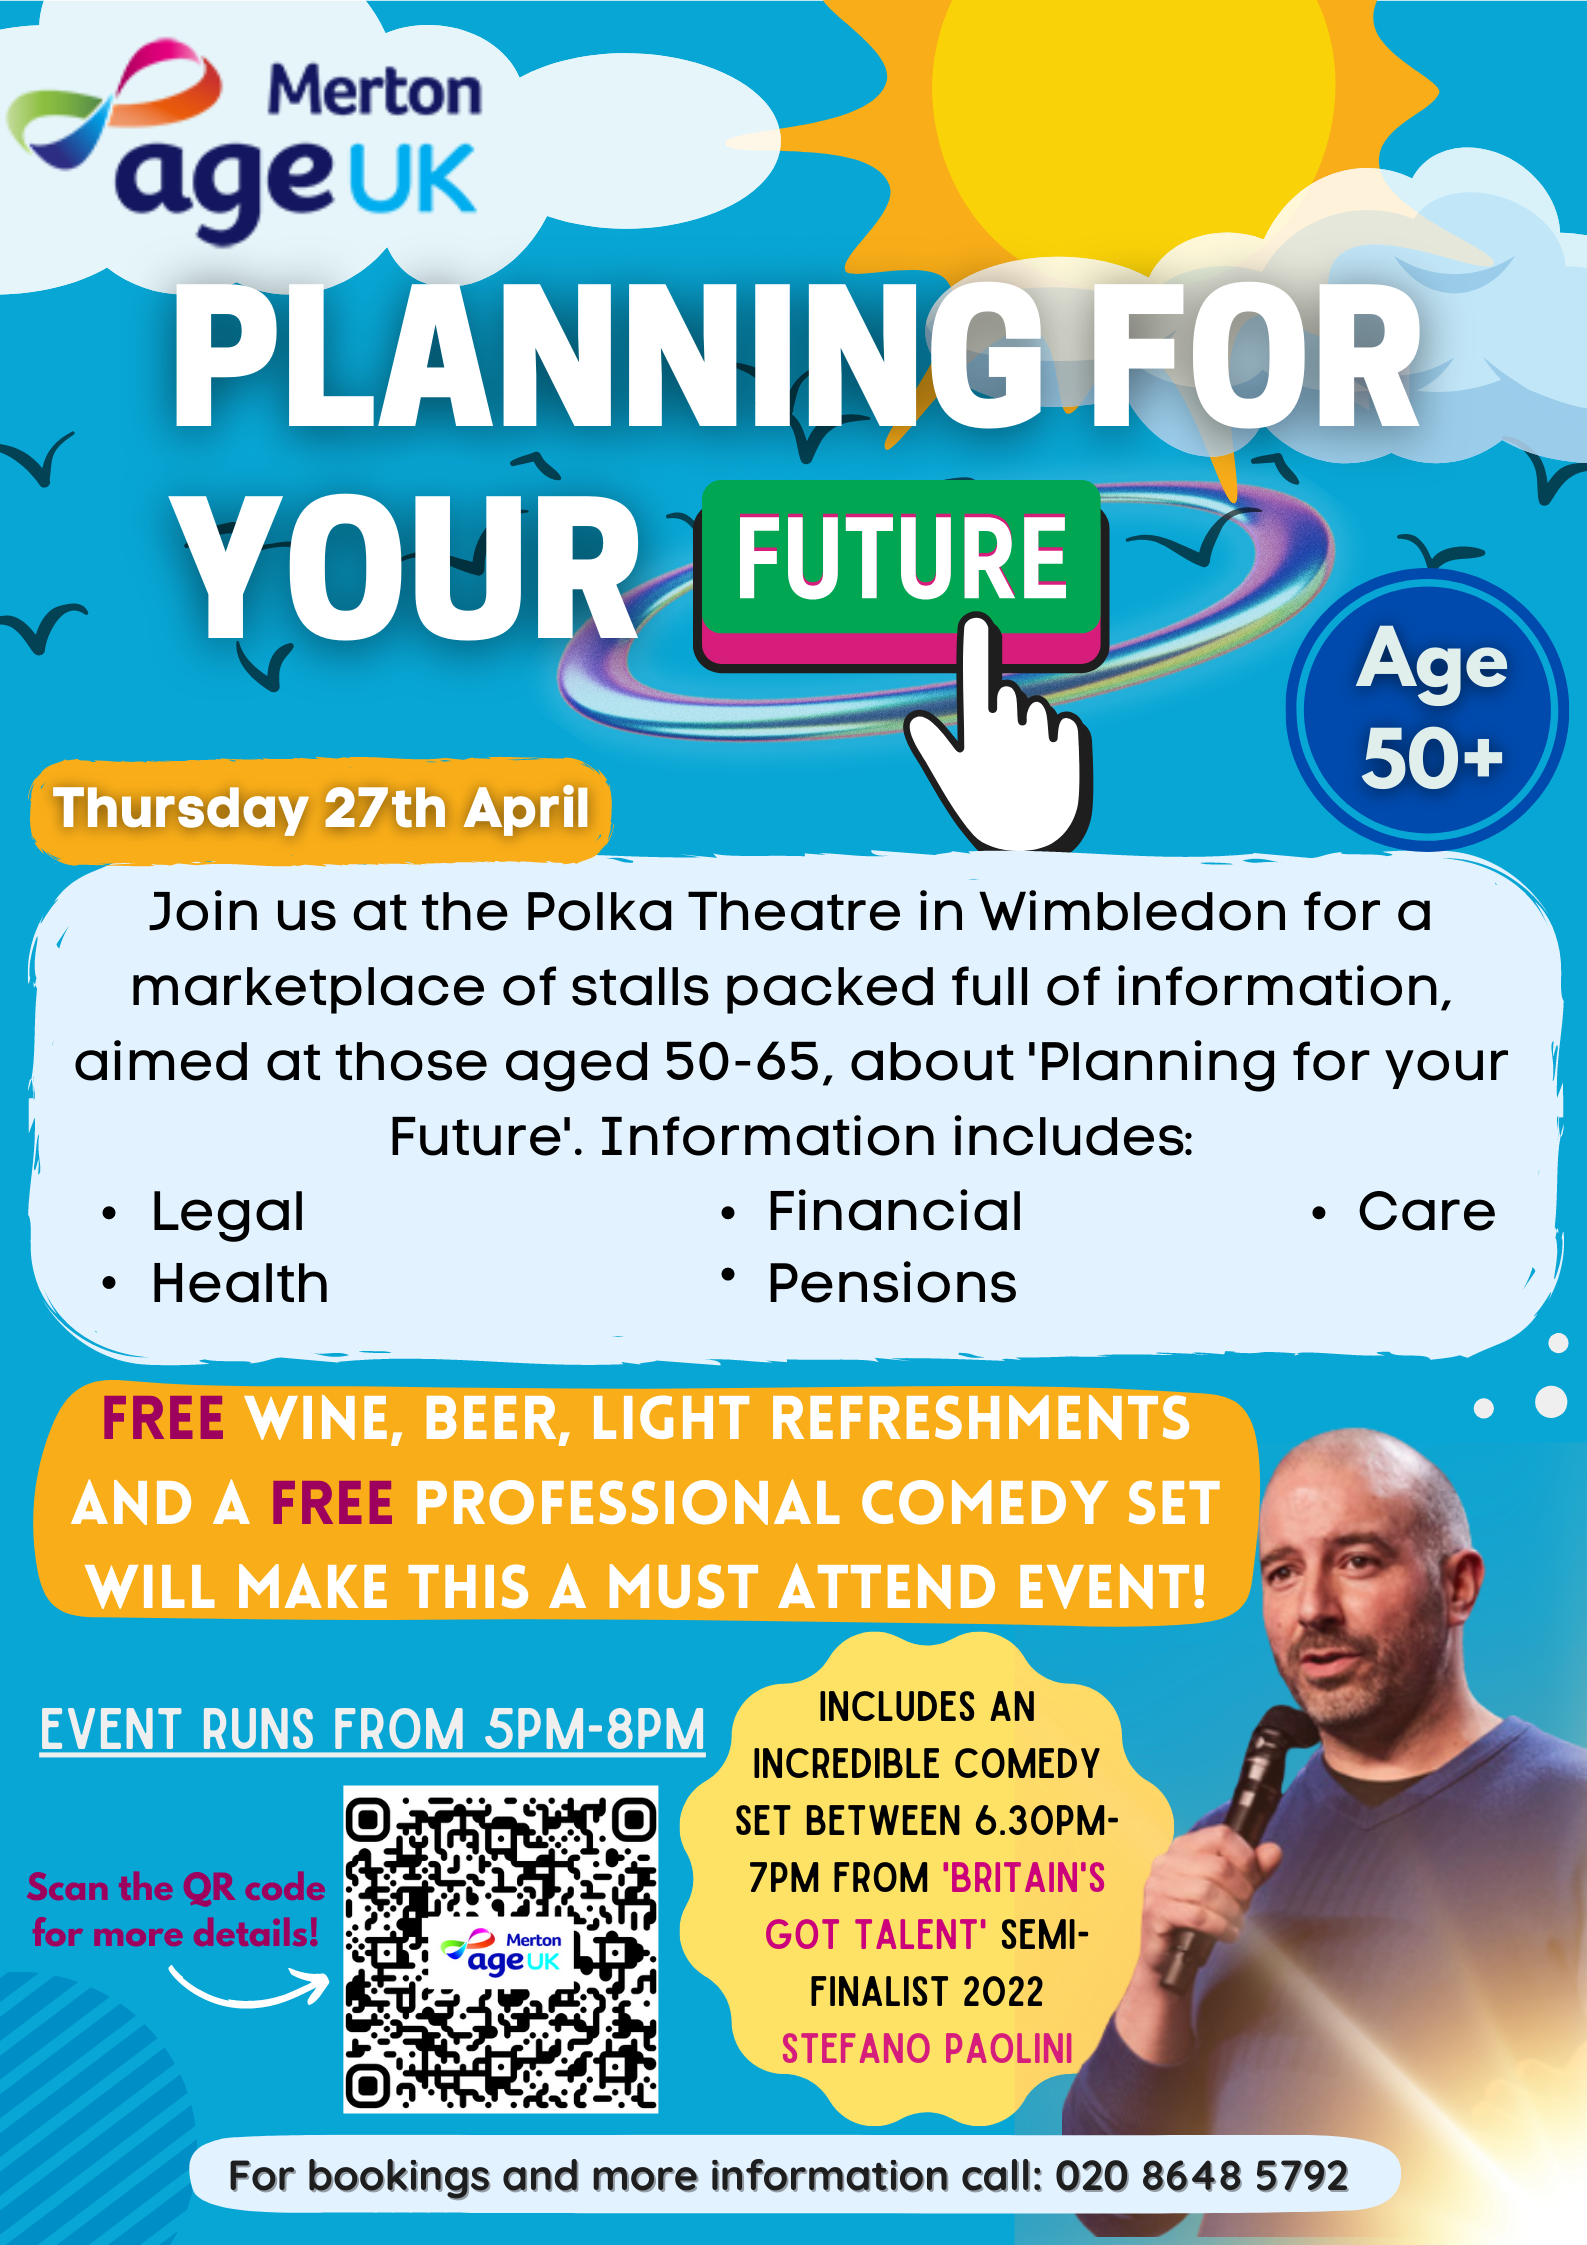 Age UK Merton Planning for Your Future event poster.